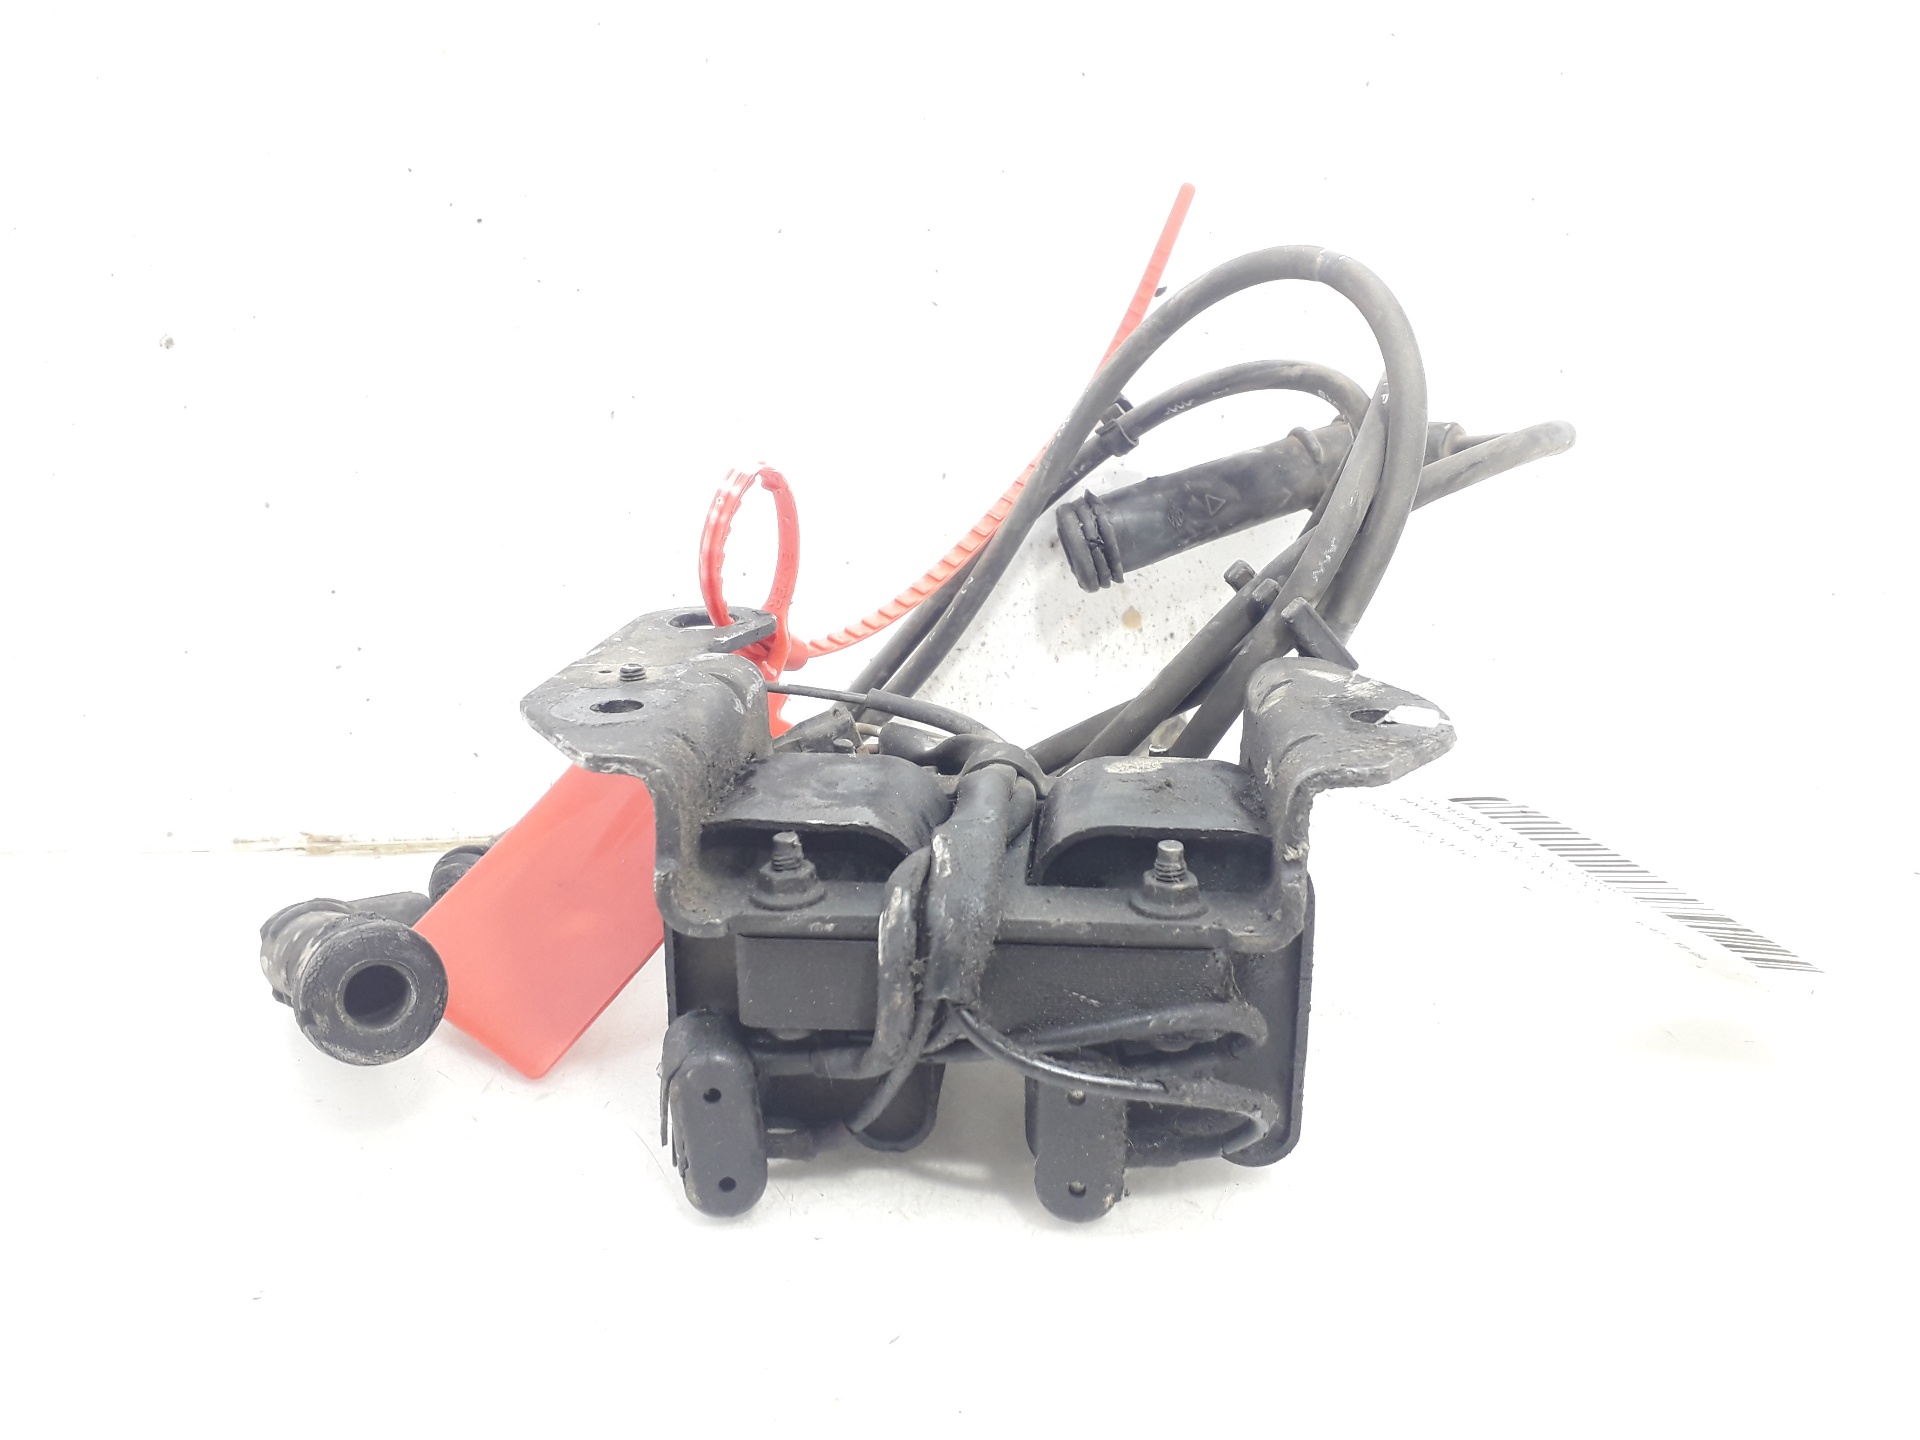 HYUNDAI Accent X3 (1994-2000) High Voltage Ignition Coil 2730122040 18795825